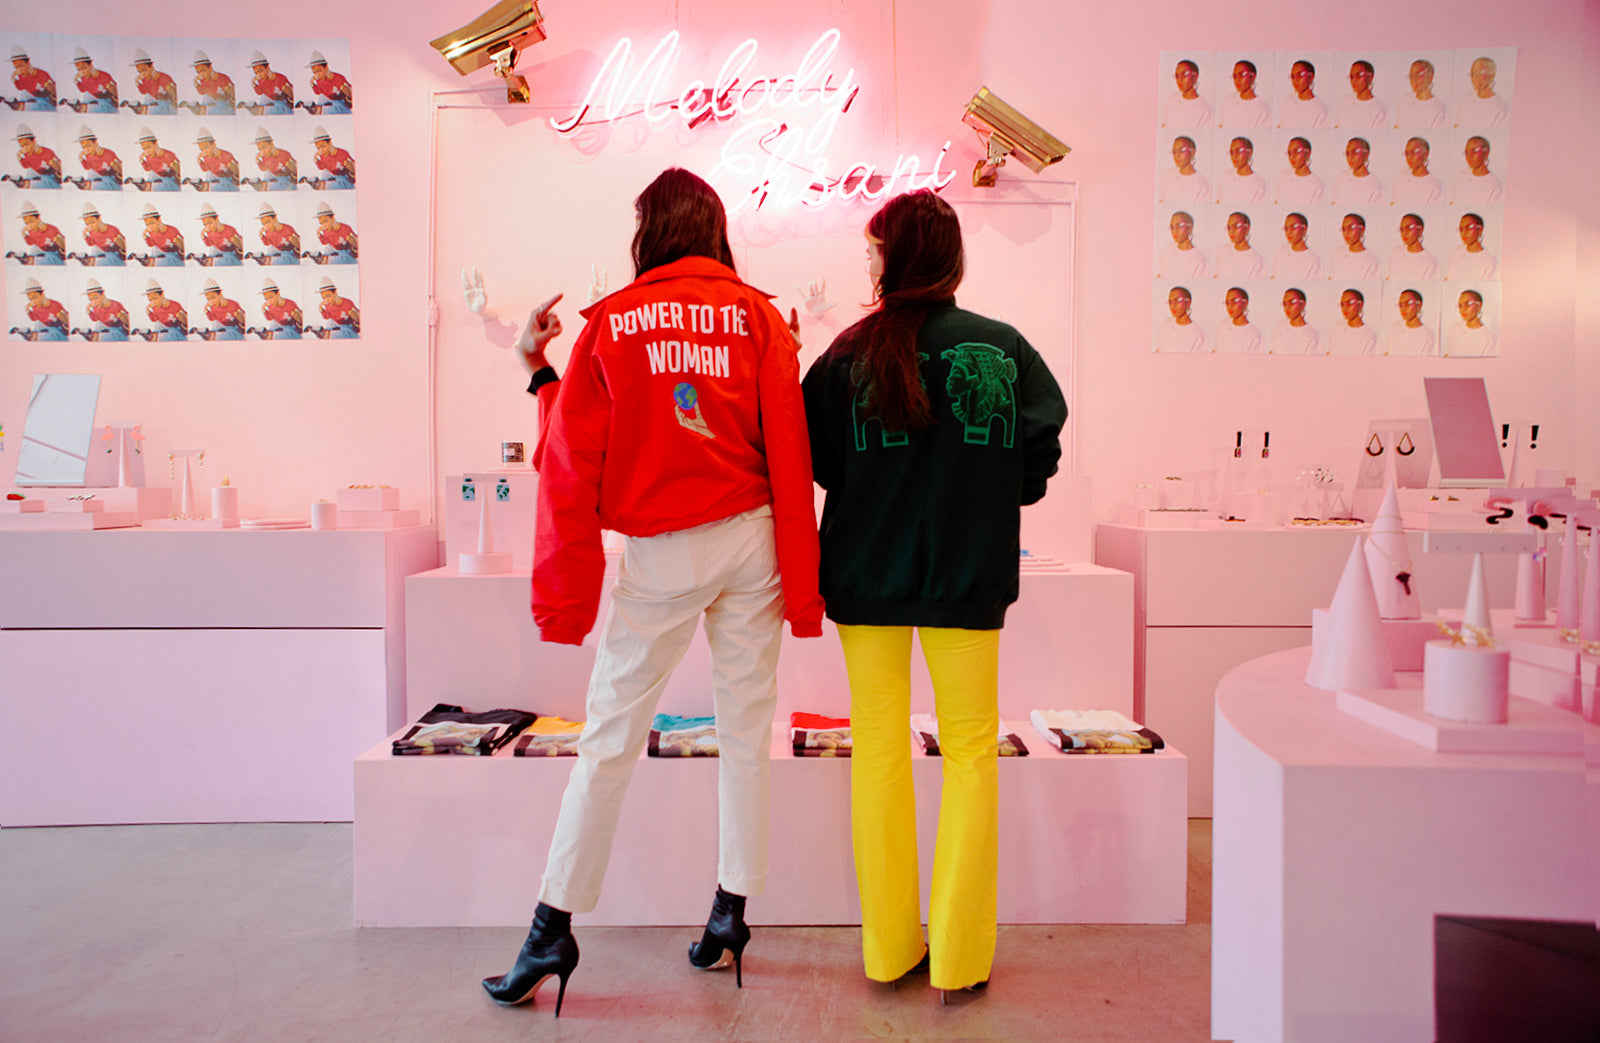 Shay Mitchell (left) displays the design on the back of her jacket, which reads "Power to The Women" and Melody Ehsani (right) displays the Egyptian Pharaohs design on the back of her jacket.